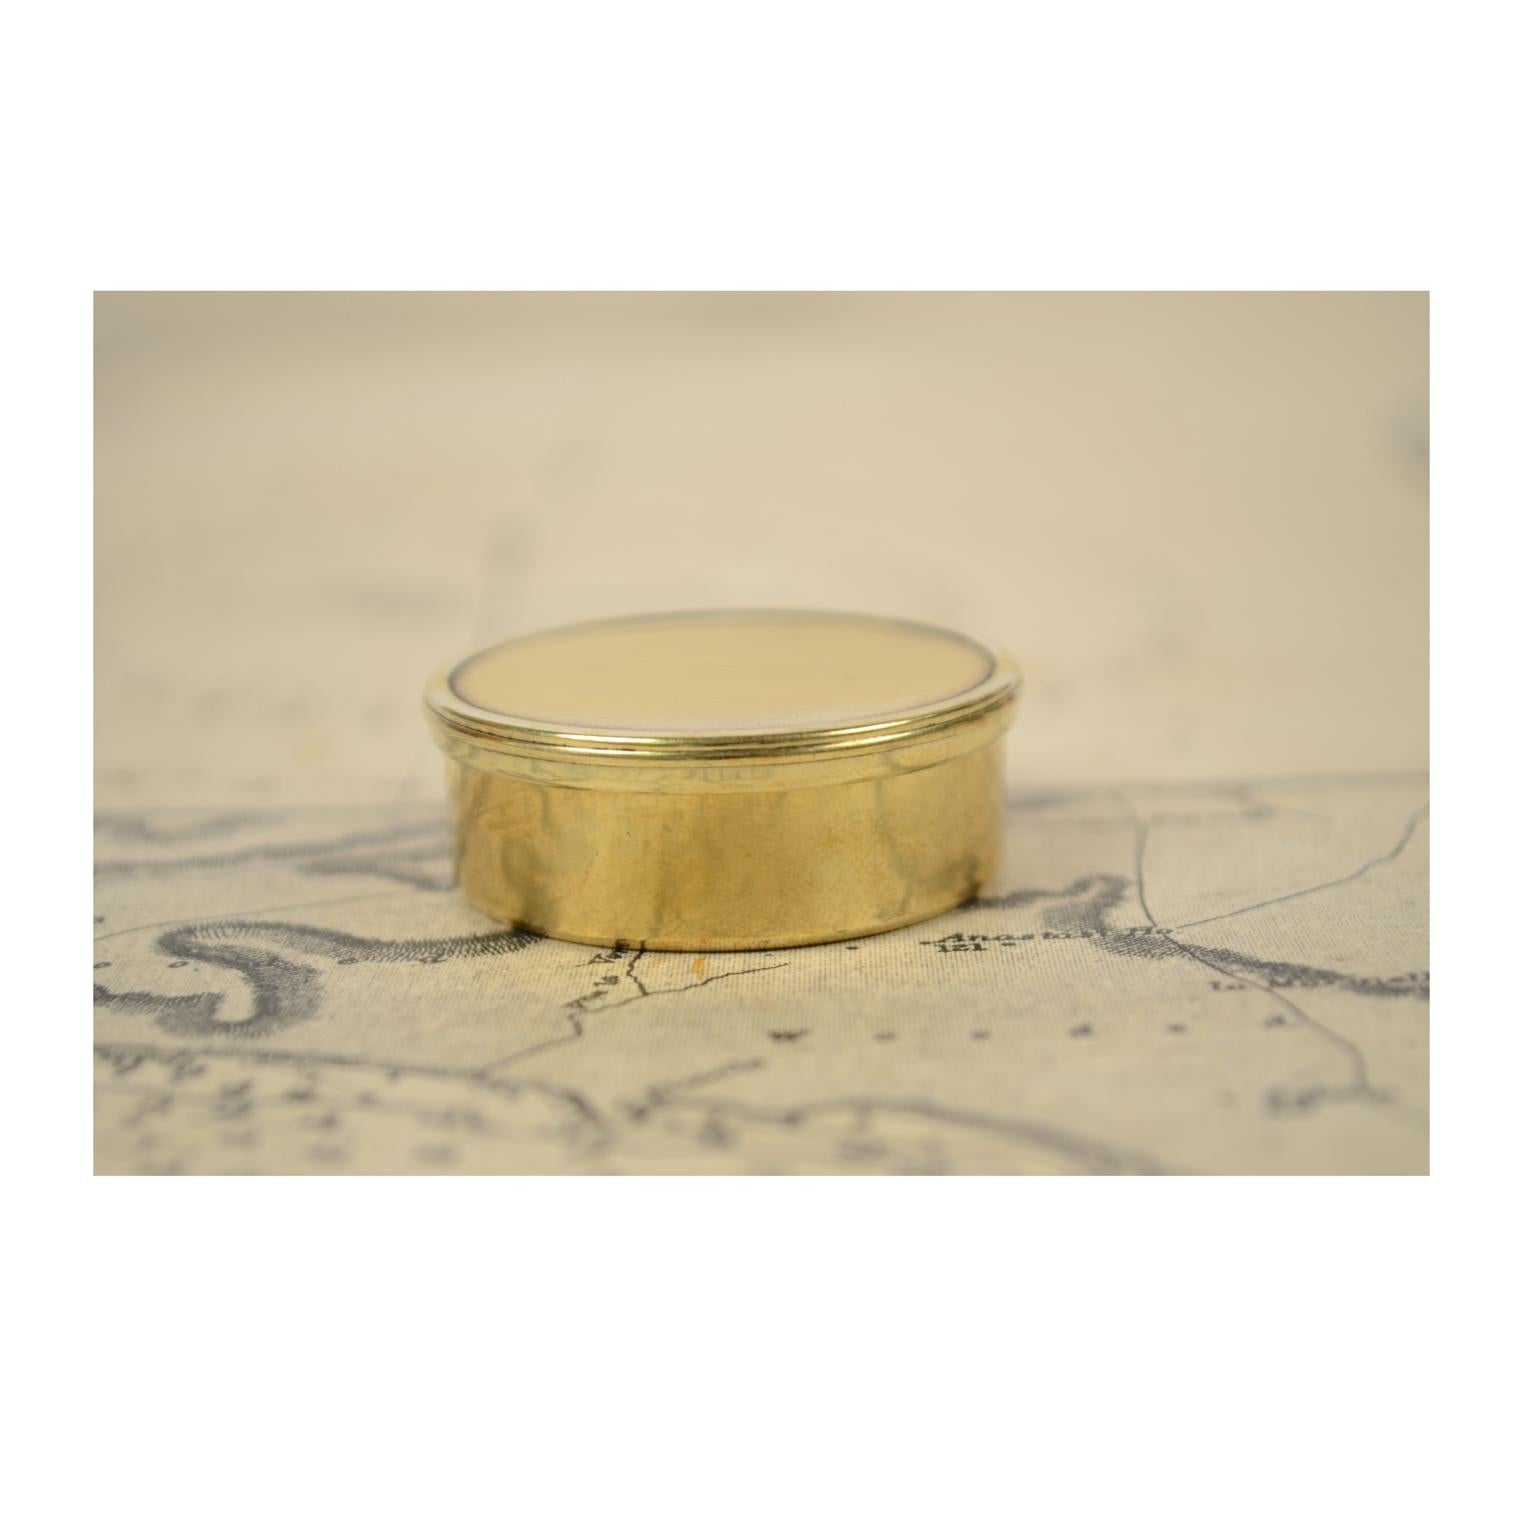 Dry Pocket Nautical Compass Placed in Its Original Box Made of Turned Brass 4